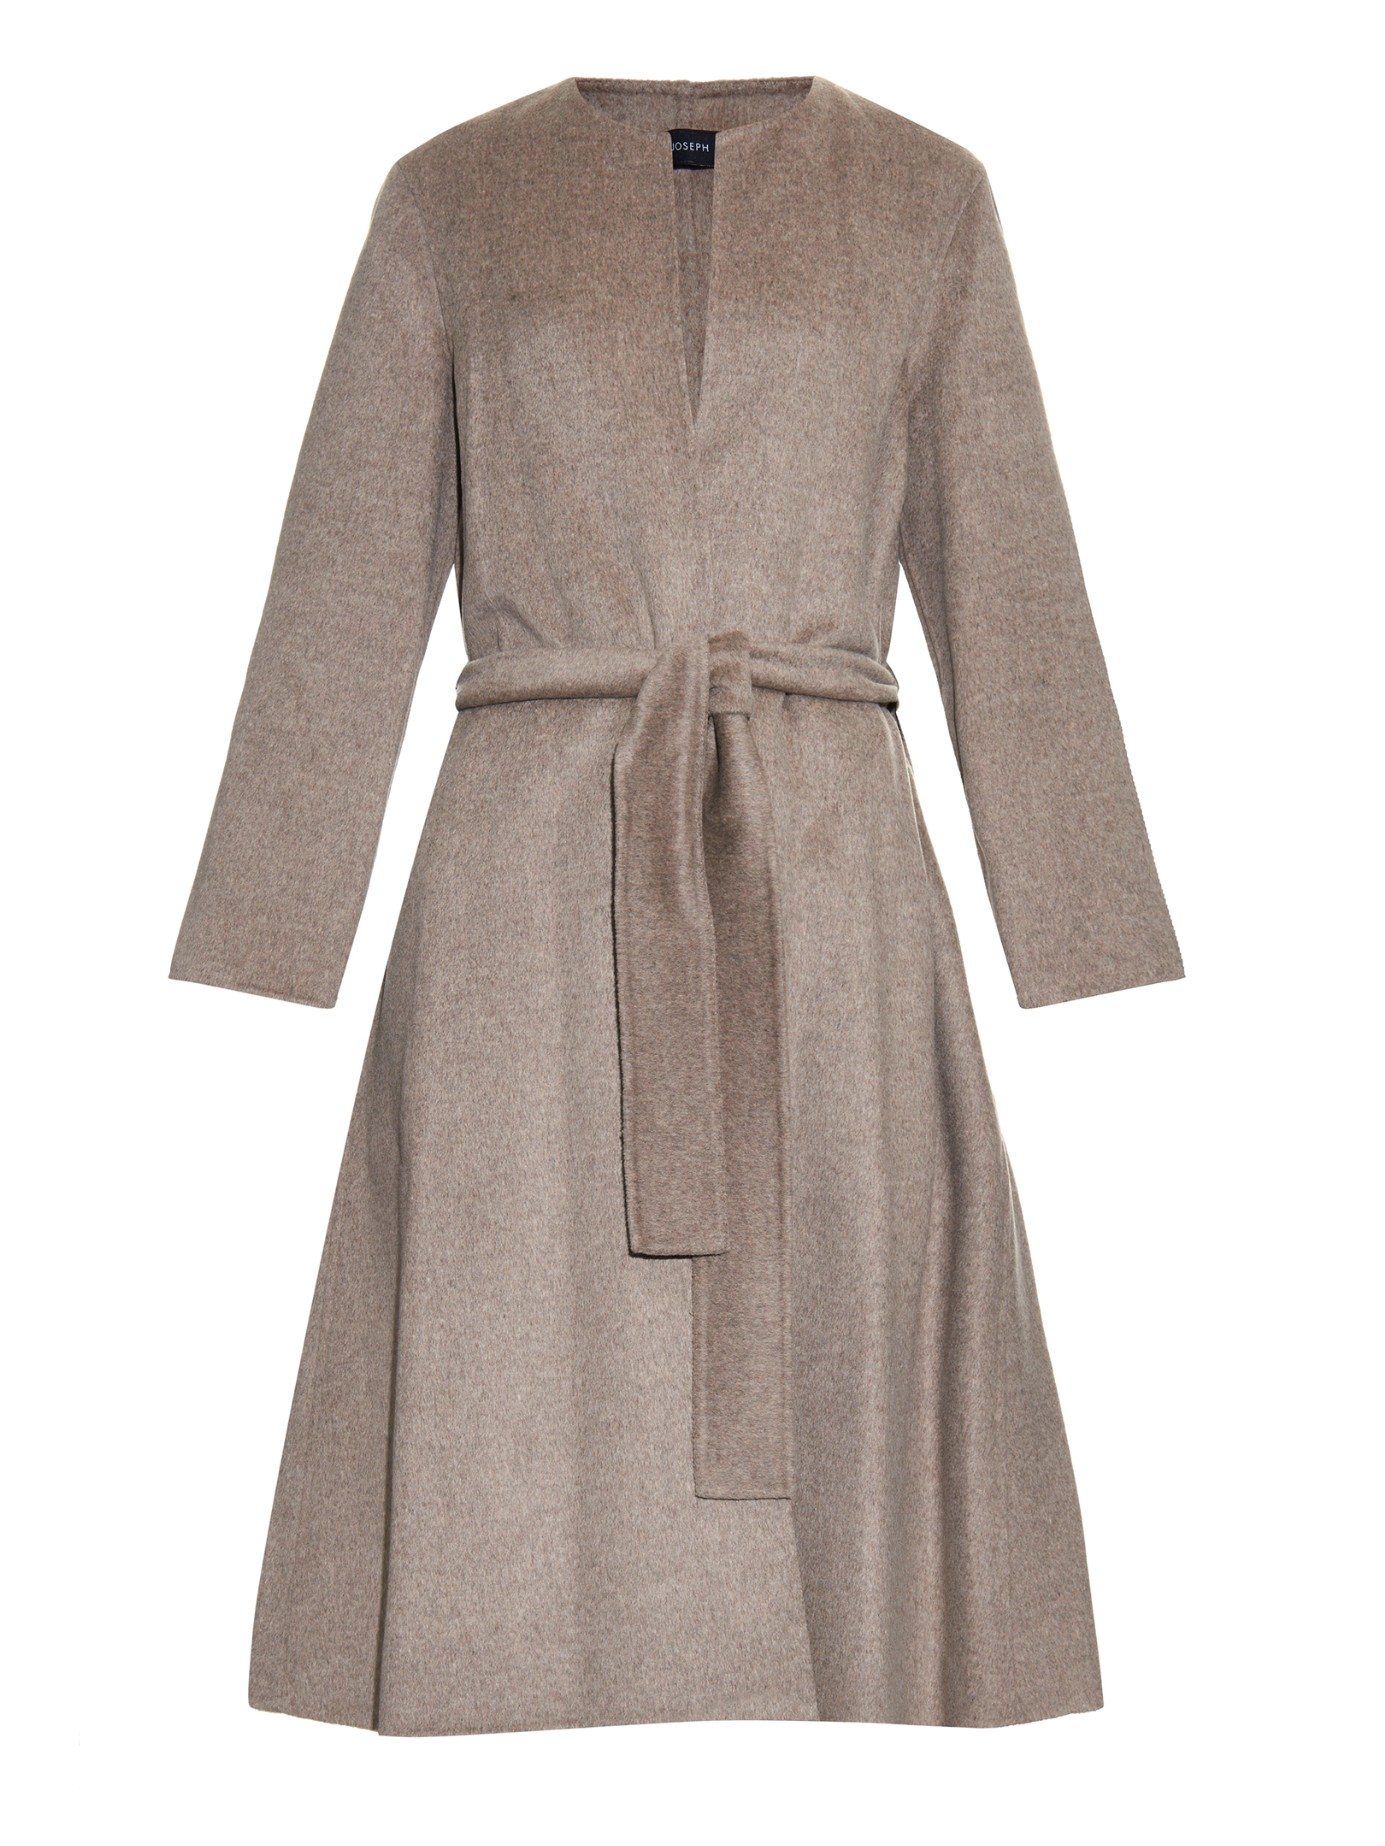 Lyst - Joseph Double-faced Wool And Cashmere-blend Coat in Natural